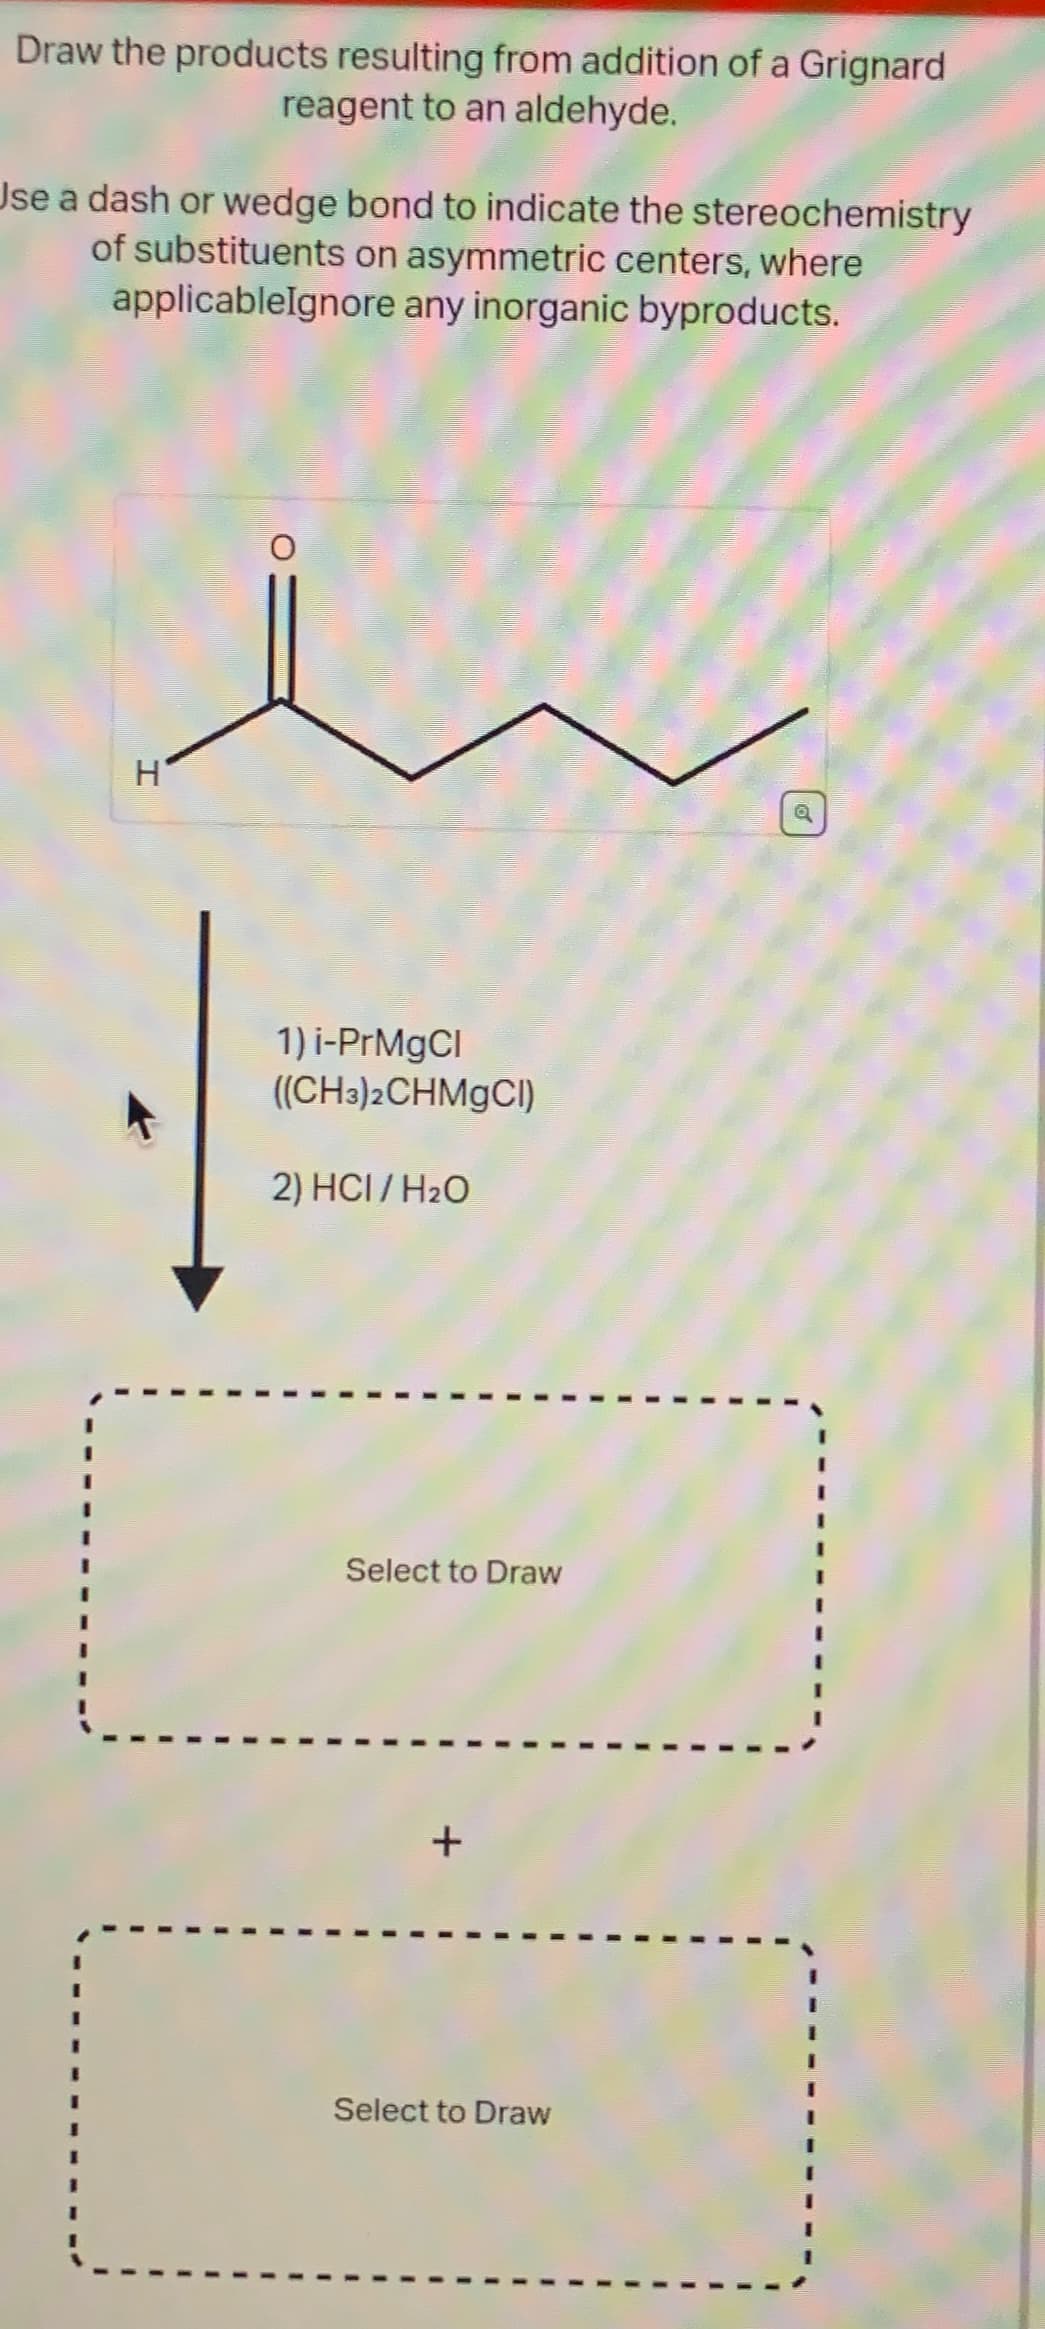 Draw the products resulting from addition of a Grignard
reagent to an aldehyde.
Use a dash or wedge bond to indicate the stereochemistry
of substituents on asymmetric centers, where
applicableIgnore any inorganic byproducts.
u
H
1) i-PrMgCl
((CH3)2CHMgCl)
2) HCI/H₂O
Select to Draw
Select to Draw